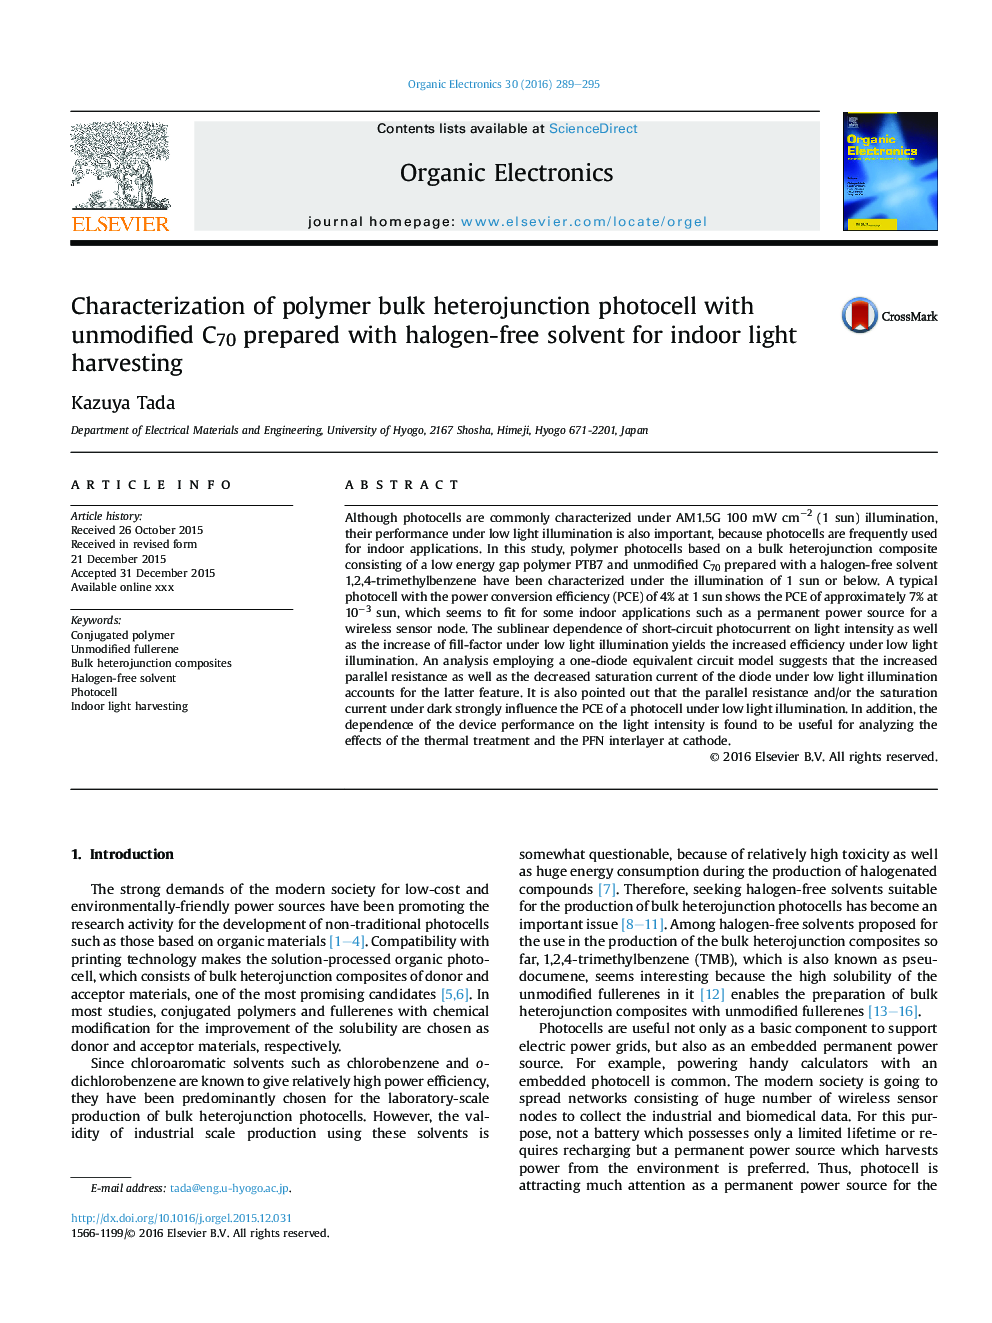 Characterization of polymer bulk heterojunction photocell with unmodified C70 prepared with halogen-free solvent for indoor light harvesting